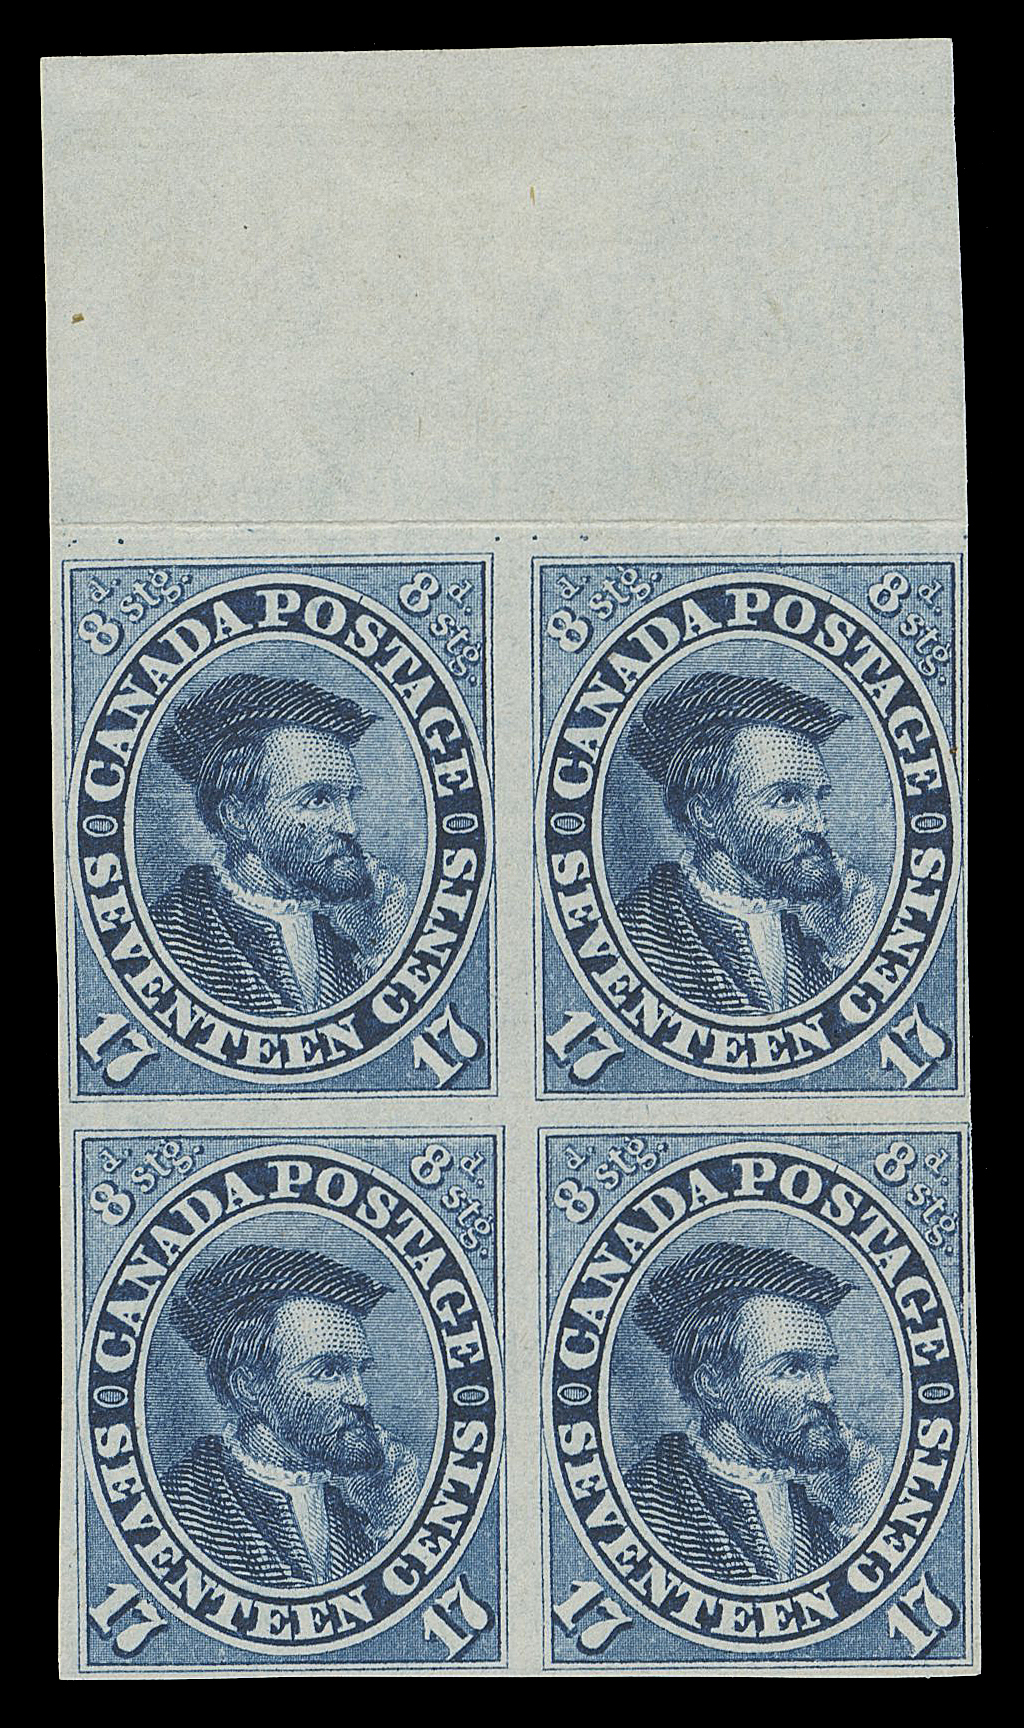 TEN PENCE AND SEVENTEEN CENTS  19b + variety,A very scarce mint imperforate block of four, close to ample margins, horizontal fold entirely confined to top margin. Shows the constant Re-entry at Position 5 - top left stamp with prominent doubling in letters and oval above "GE" of "POSTAGE", ungummed as normally encountered. A one-of-a-kind imperforate block from the sole imperforate sheet printed, Fine+ (Unitrade 19b + variety; cat. as two normal pairs)

Expertization: 1997 Greene Foundation certificate

Provenance: Fred Jarrett, Sissons Sale 169, December 1959; Lot 358
British North America Sale, Harmers of New York, February 1980; Lot 137
